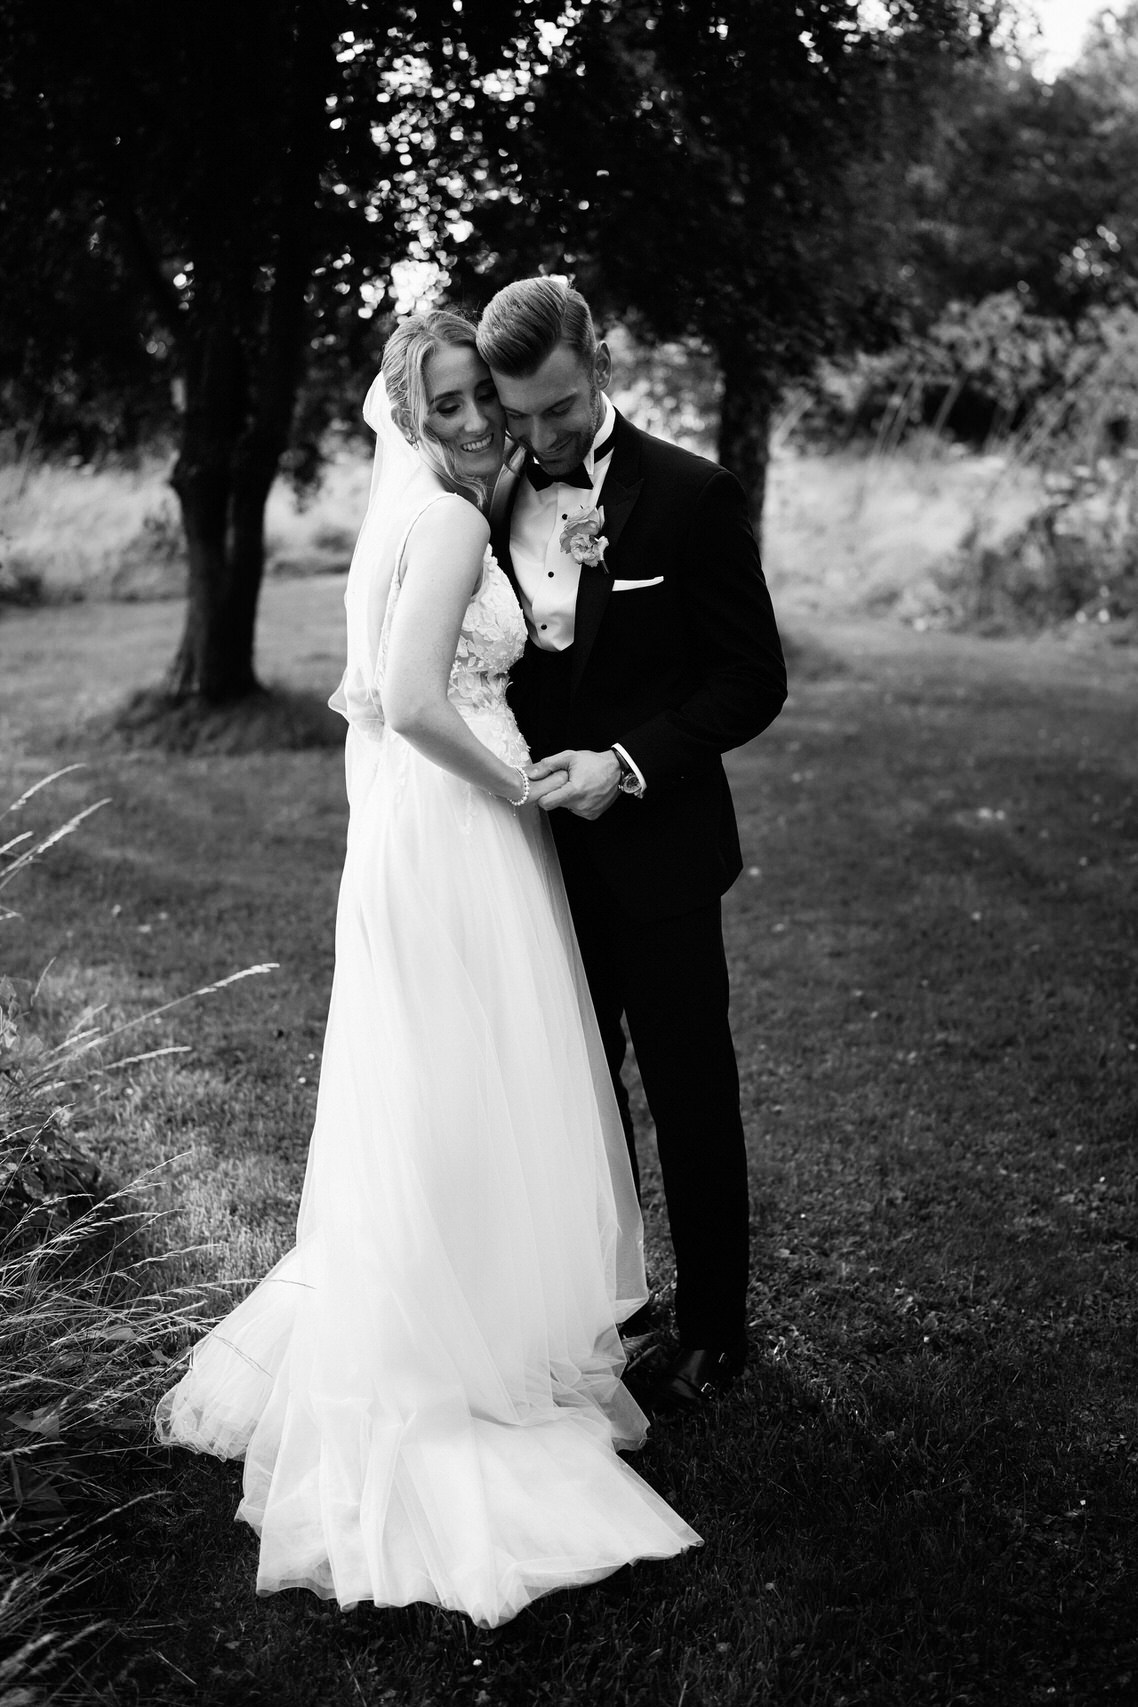 A bride and groom embracing in the grass.